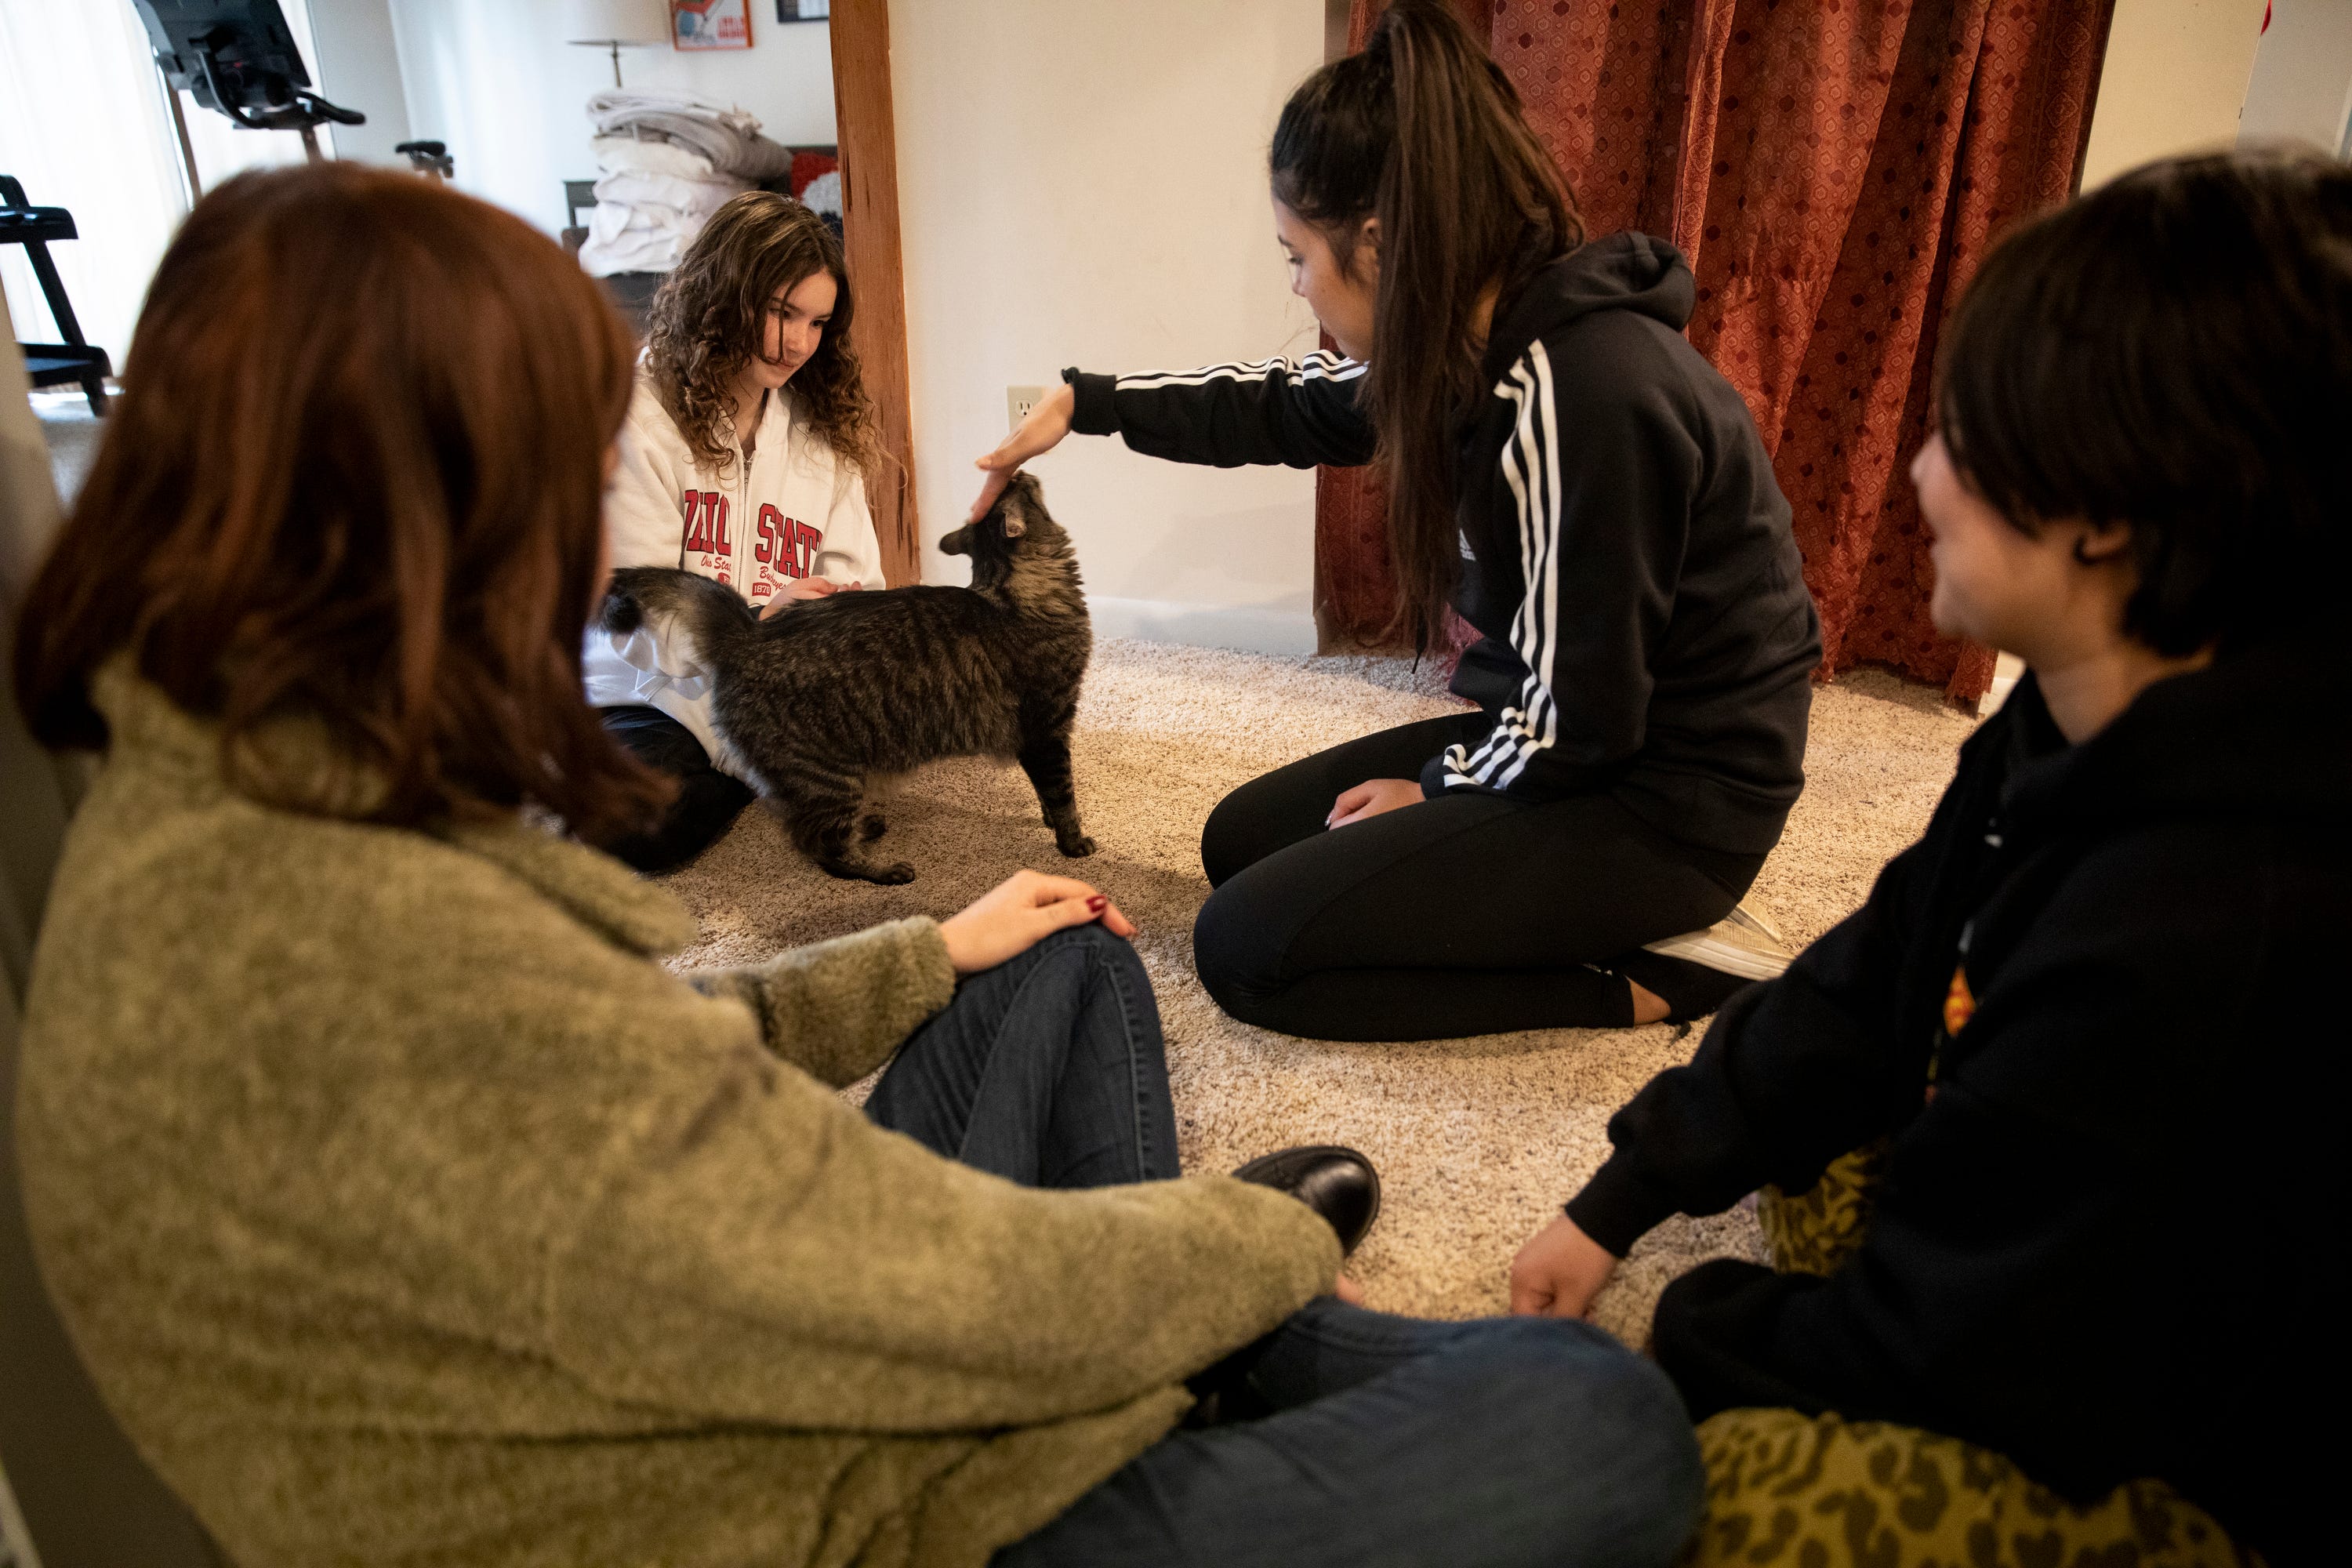 Sonita plays with the Landsman family cat, with Maddie Landsman, 12, after moving into the Landsman's home in Mt. Washington. Sonita left her dogs and family when she fled Kabul with Soria and Fatana.